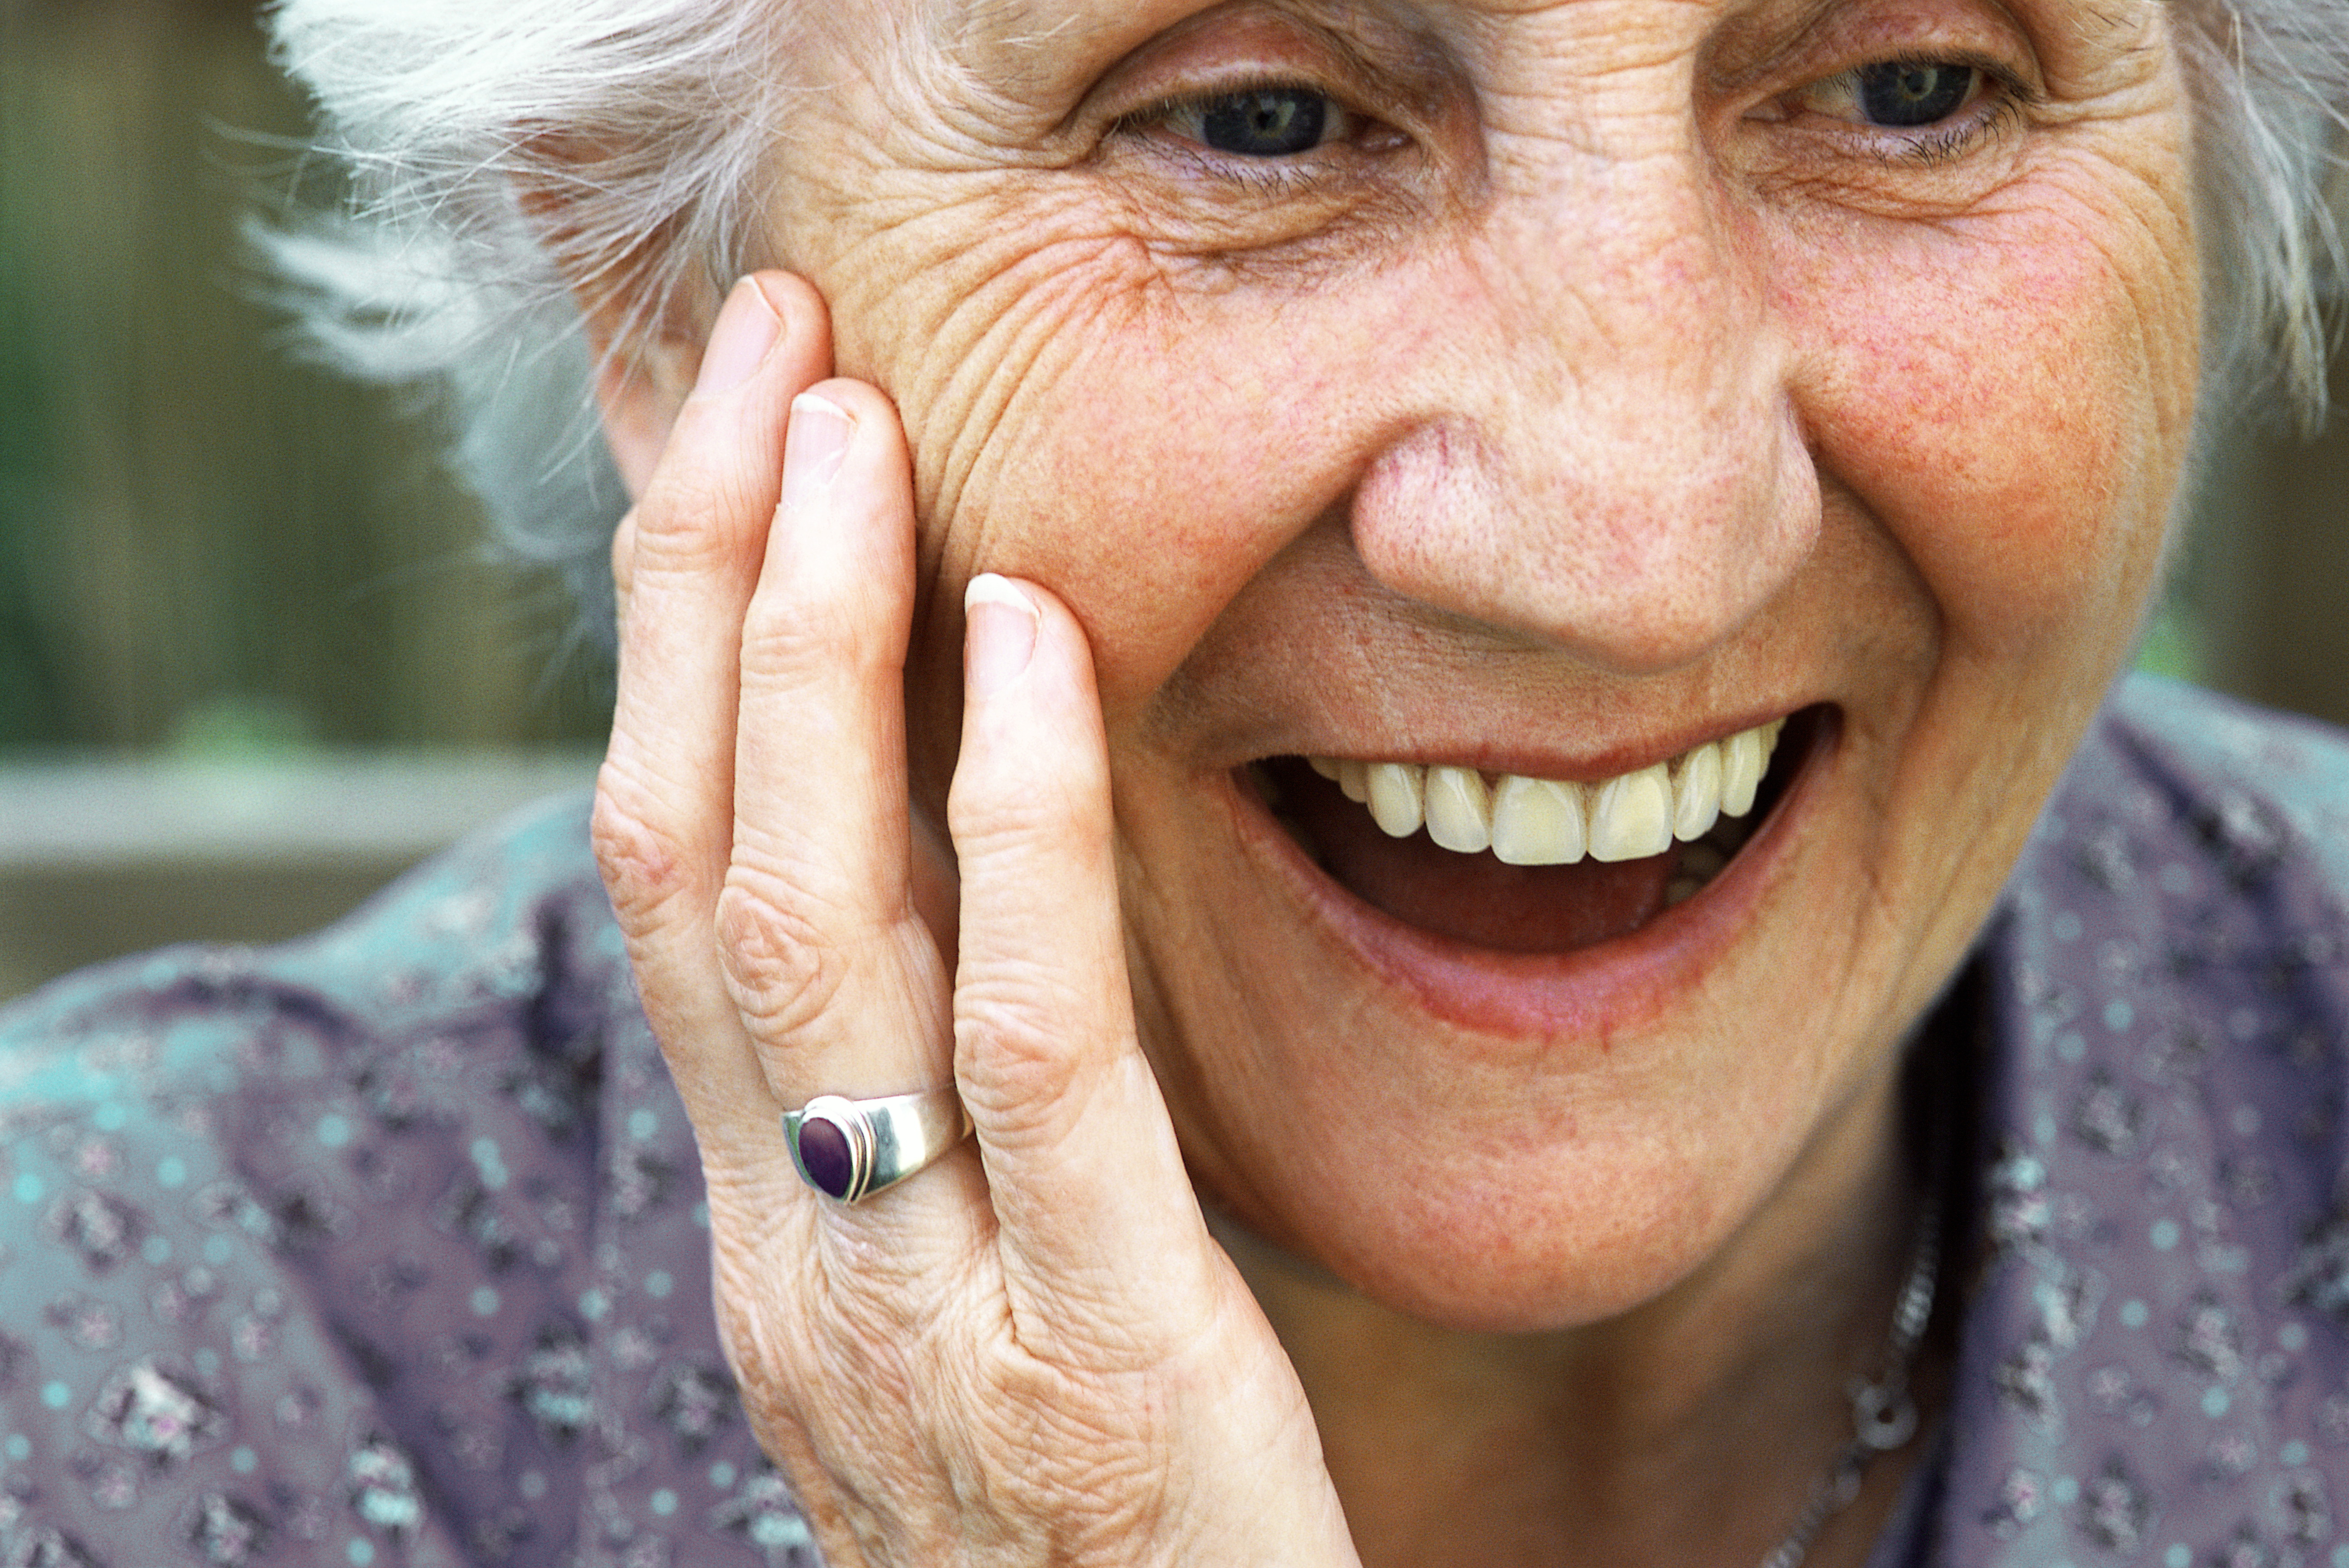 A  smiling older woman | Source: Getty Images